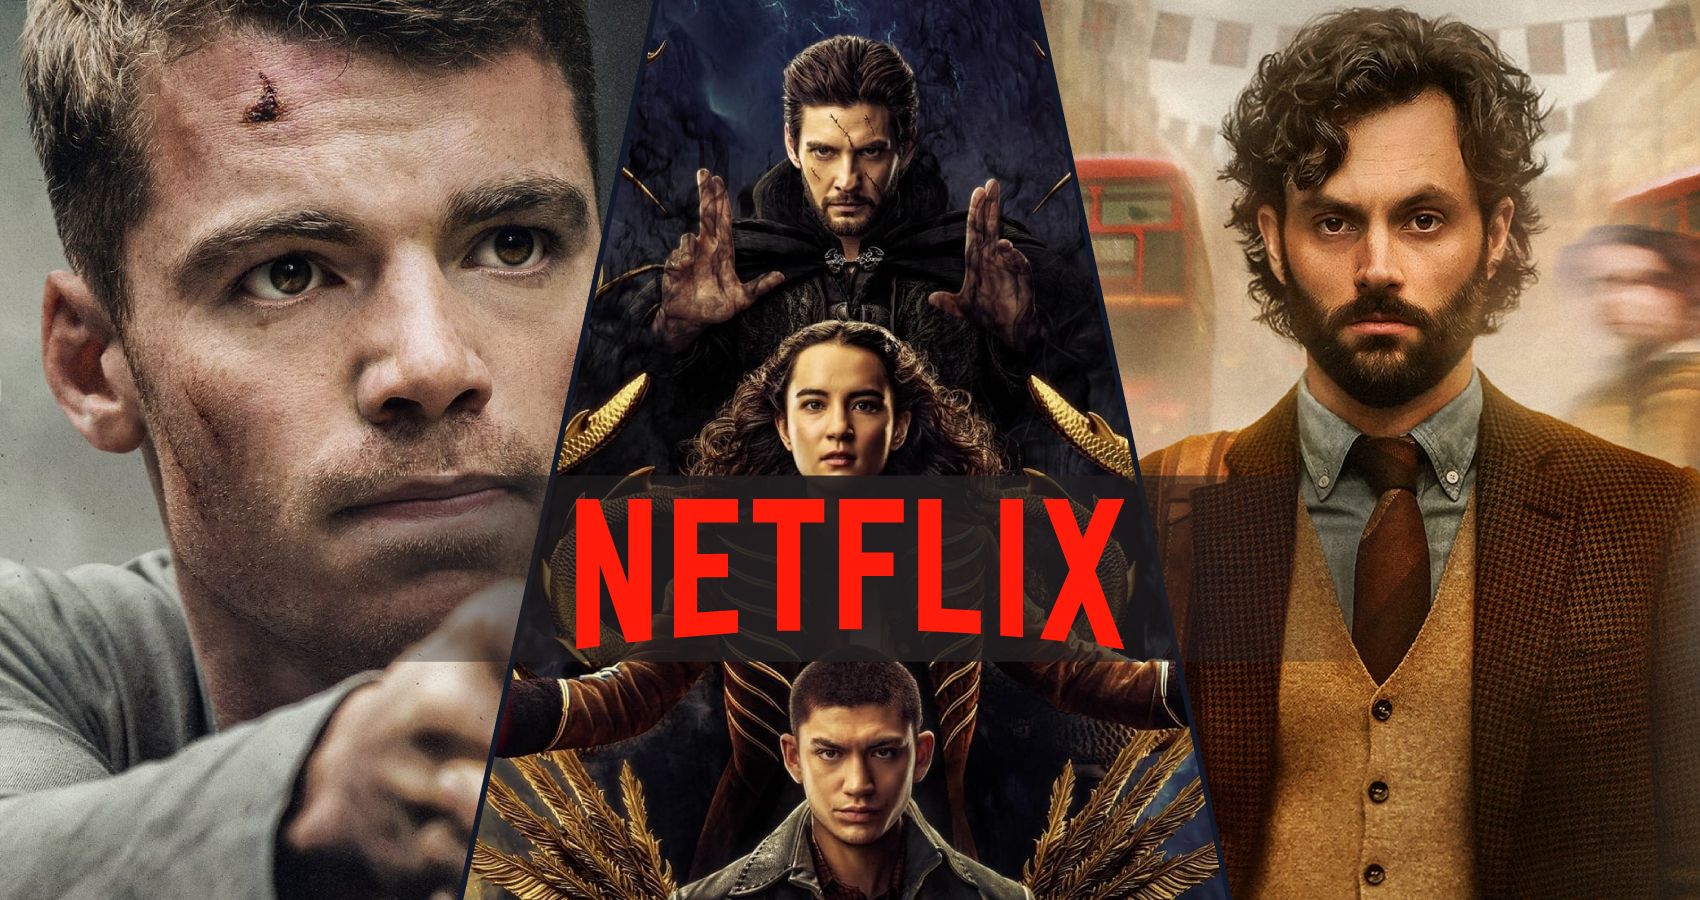 10 New Netflix Action Movies And Series We're Excited For In 2023